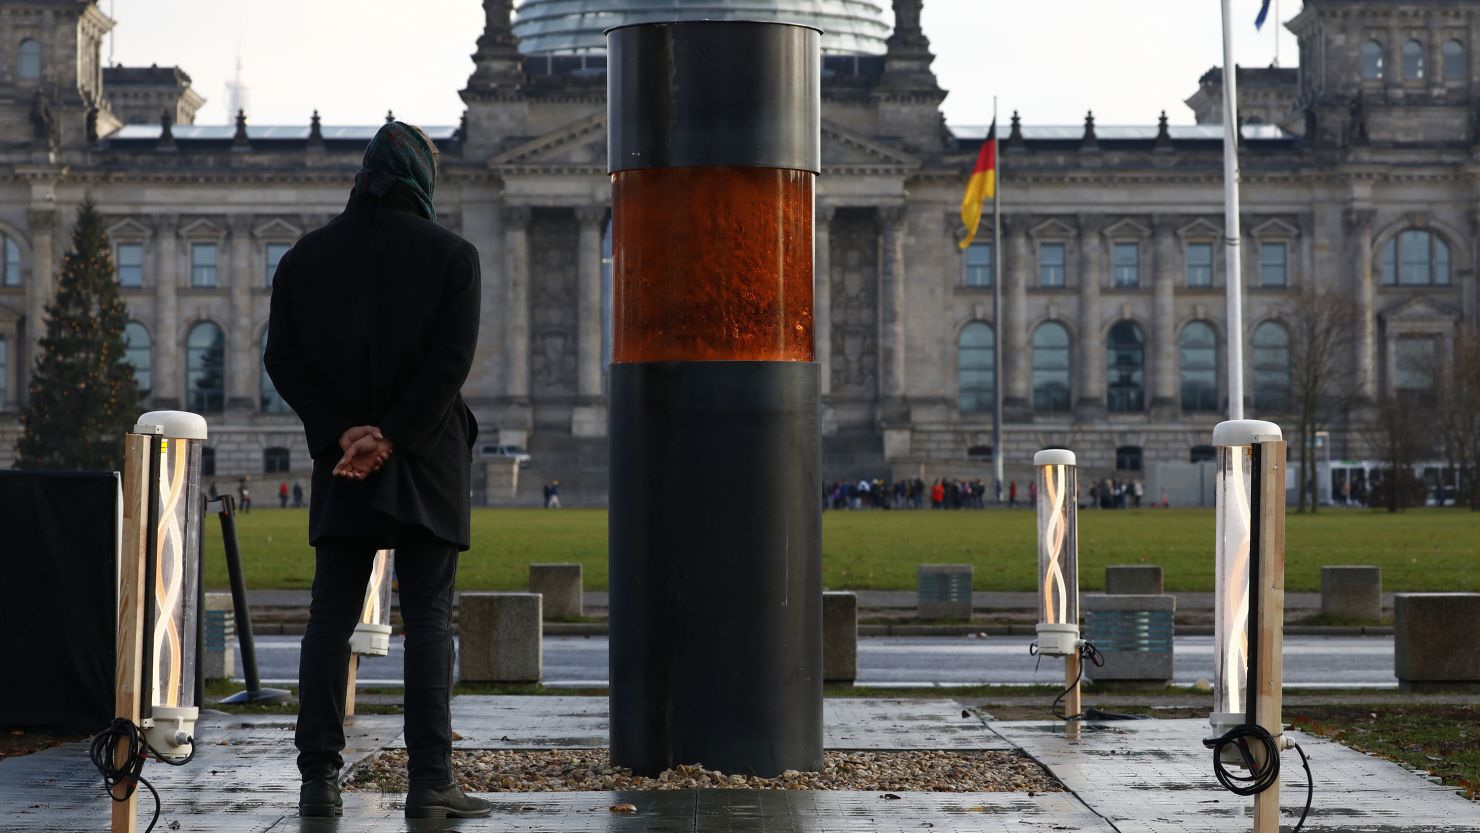 The urn stands in a memorial erected by the Center for Political Beauty opposite the German parliament.